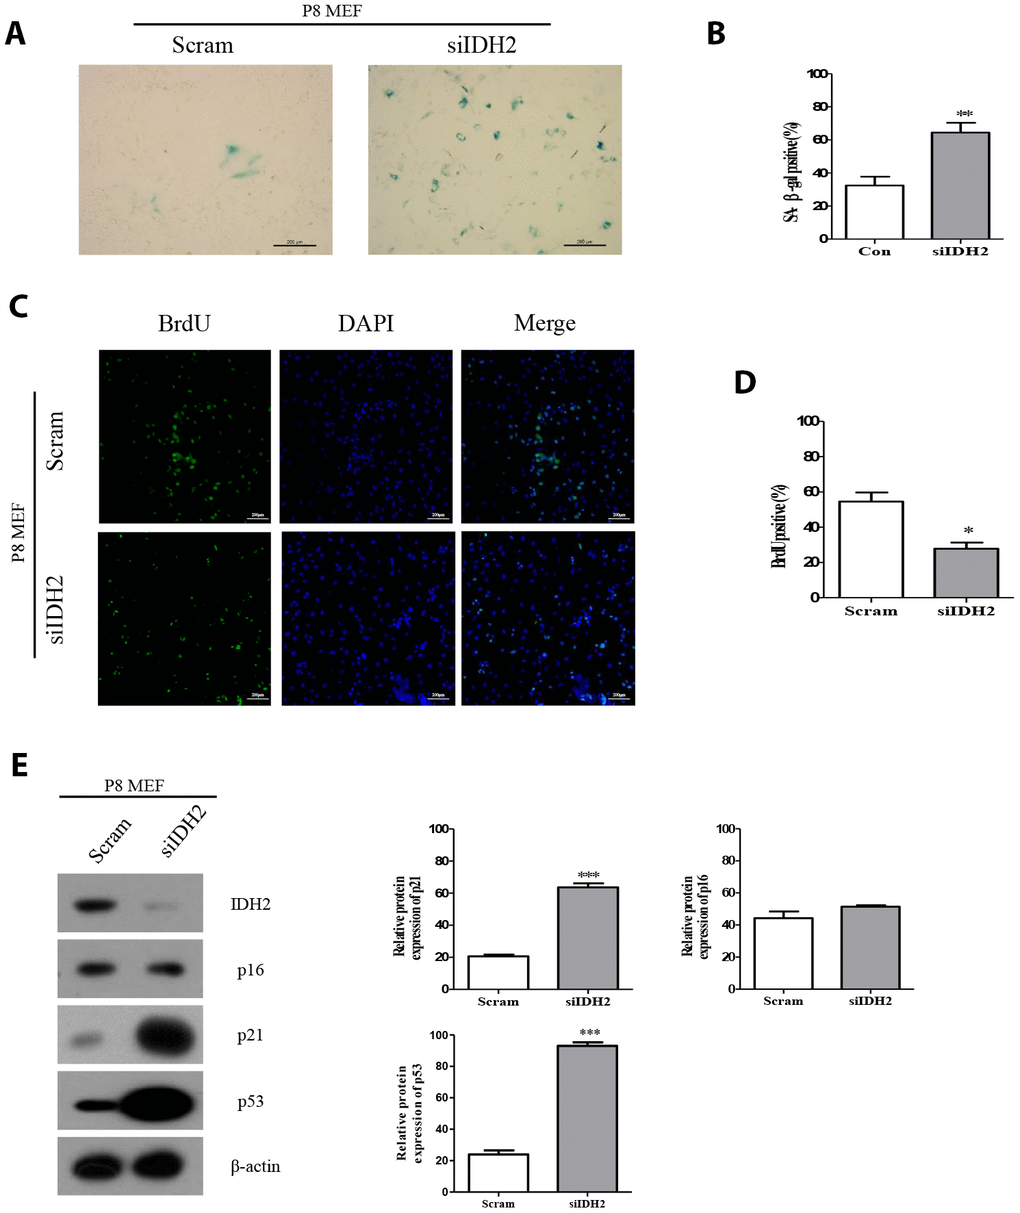 Downregulation of Idh2 in senescent mouse embryonic fibroblasts (MEFs) accelerates the senescence phenotype. (A) SA-β-gal staining of control and Idh2-silenced MEFs. Passage 8 (P8) MEFs were used. Scale bar, 200 μm. (B) Statistical analysis of SA-β-gal-stained positive cells between control and Idh2-knockdown MEFs. (C) BrdU levels between control and Idh2-knockdown MEFs as determined by immunocytochemistry. Nuclei were stained with DAPI, and the merged images show BrdU and DAPI signals. Scale bar, 10 μm. (D) Statistical analysis of BrdU-positive cells between control and Idh2-knockdown MEFs. (E) Western blot analysis between control and Idh2-knockdown MEFs. The following antibodies were used for detection: anti-Idh2, anti-p16, anti-p21, anti-p53, and anti- β-actin. Data are expressed as means ± SD (n = 3). *p p p 